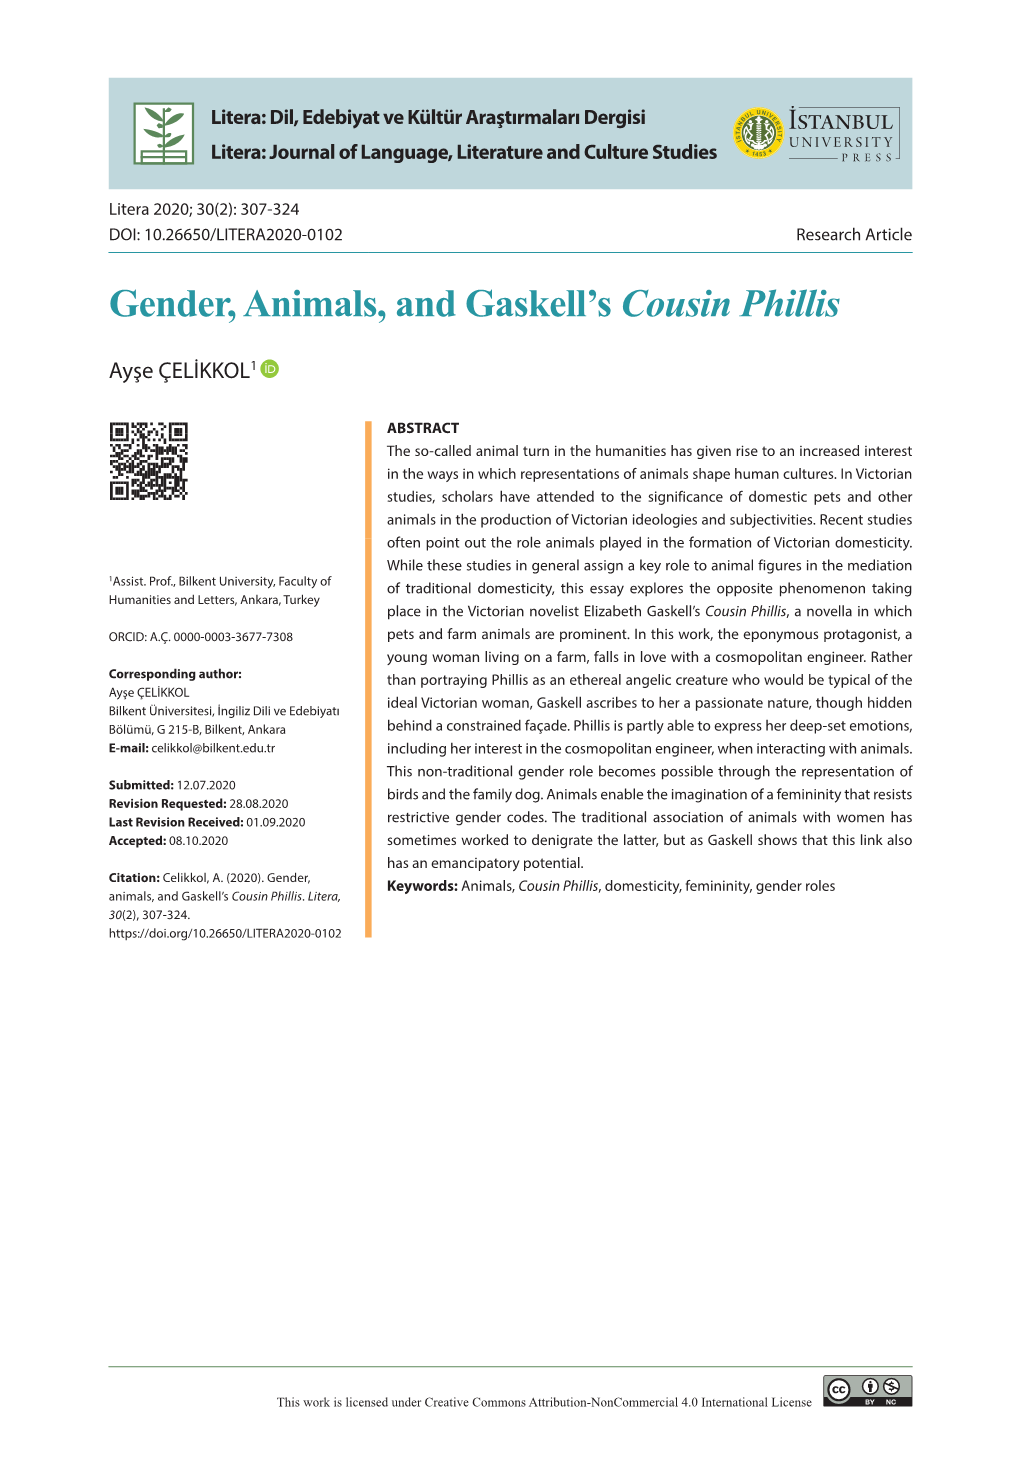 Gender, Animals, and Gaskell's Cousin Phillis